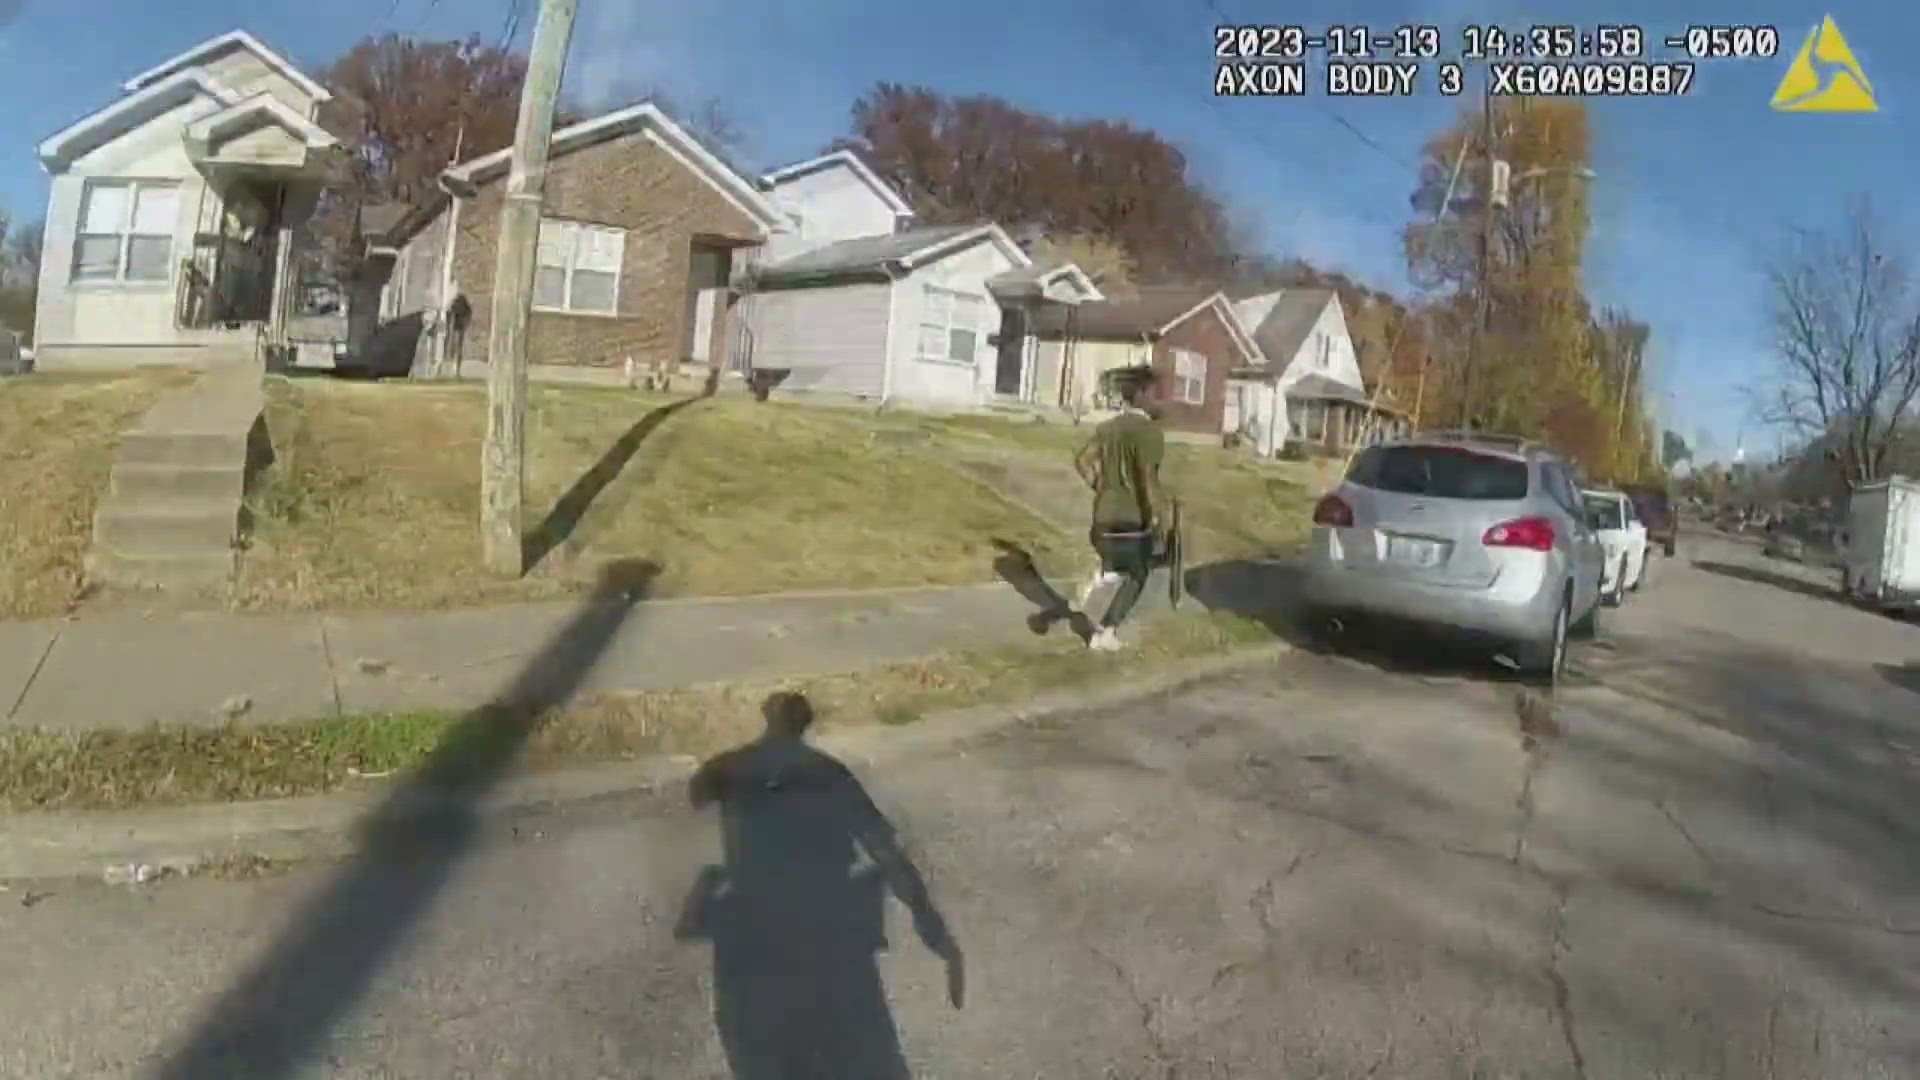 Body camera footage released today shows the chase that led a Louisville Metro Police officer to shoot and injure a  man accused of domestic violence